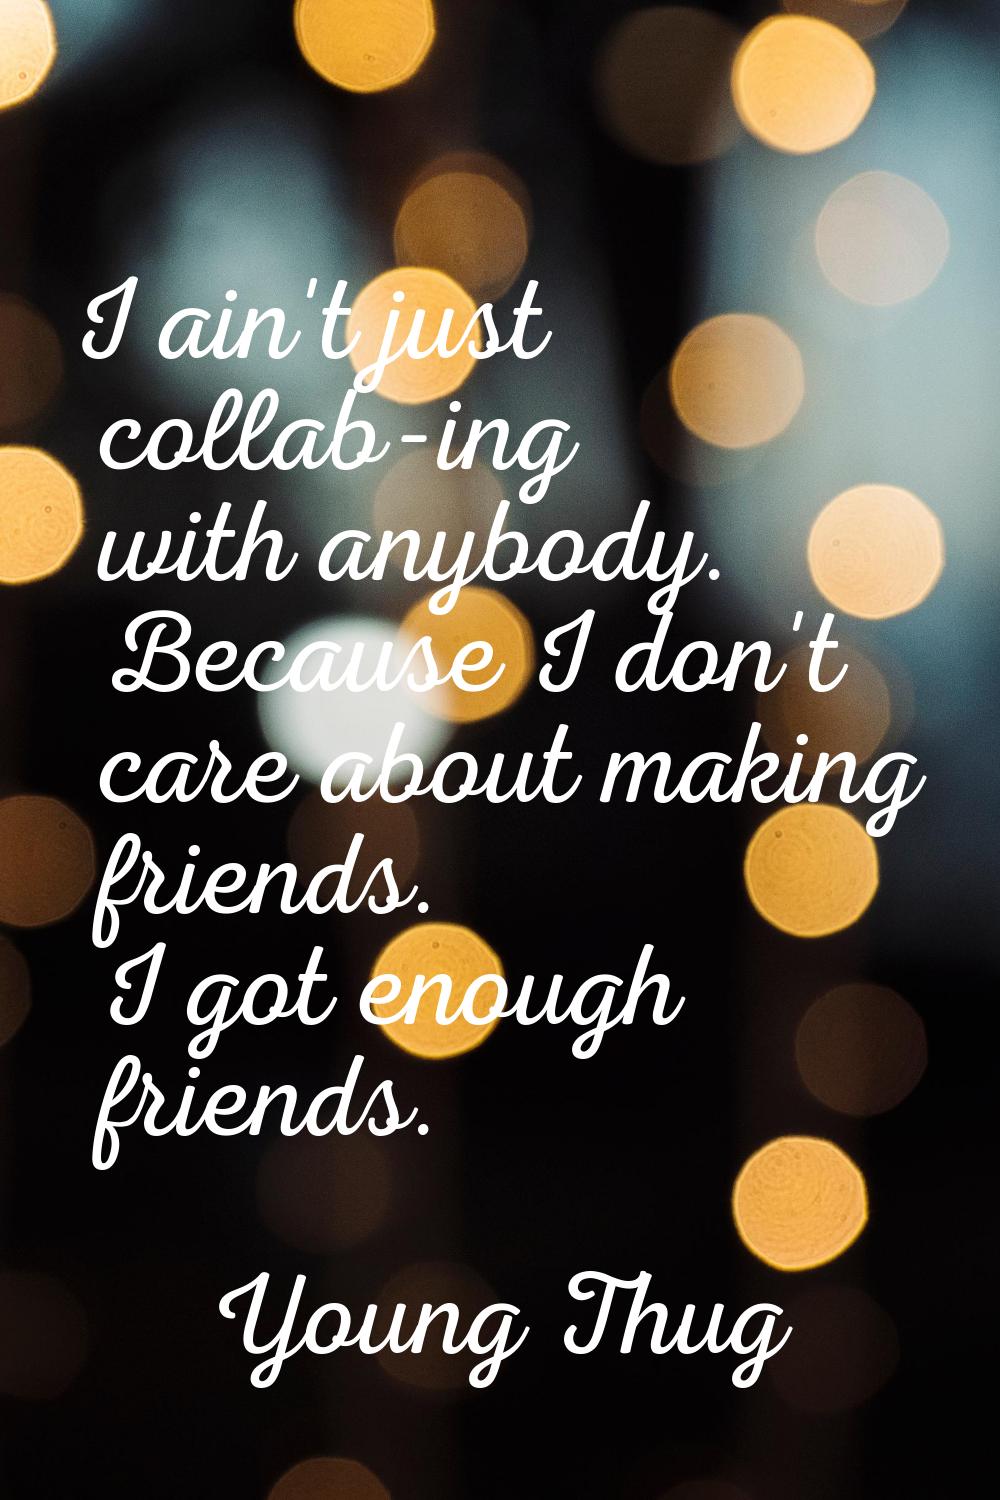 I ain't just collab-ing with anybody. Because I don't care about making friends. I got enough frien